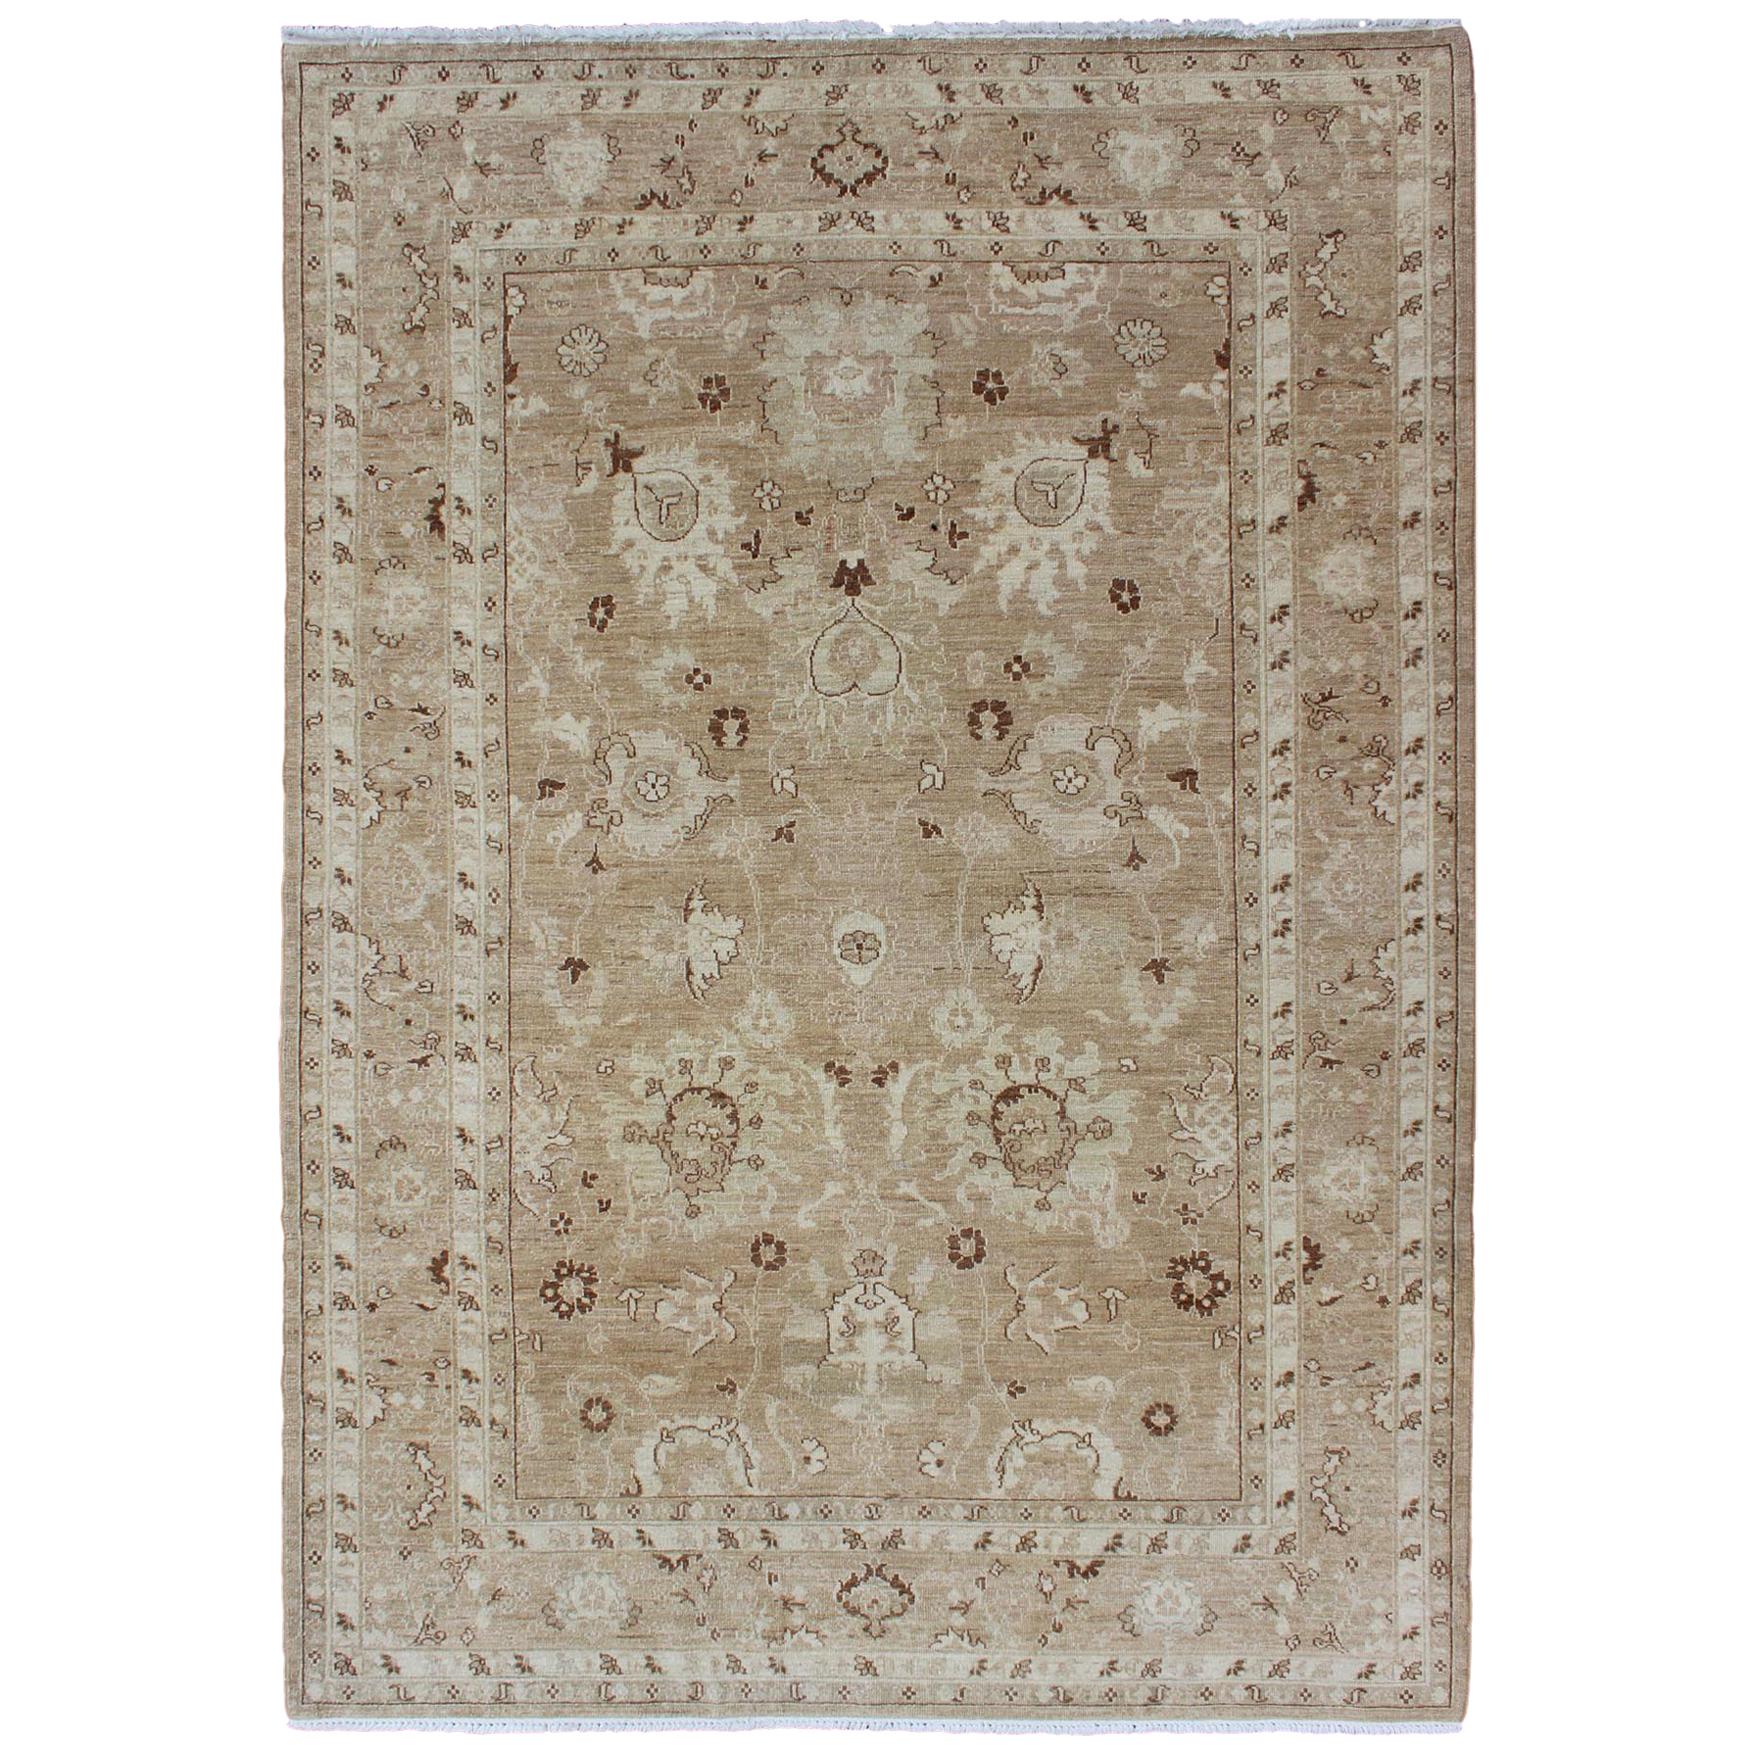 Vintage Afghan Rug in Muted Earthy Tones of Light Brown, Caramel, Light Green For Sale